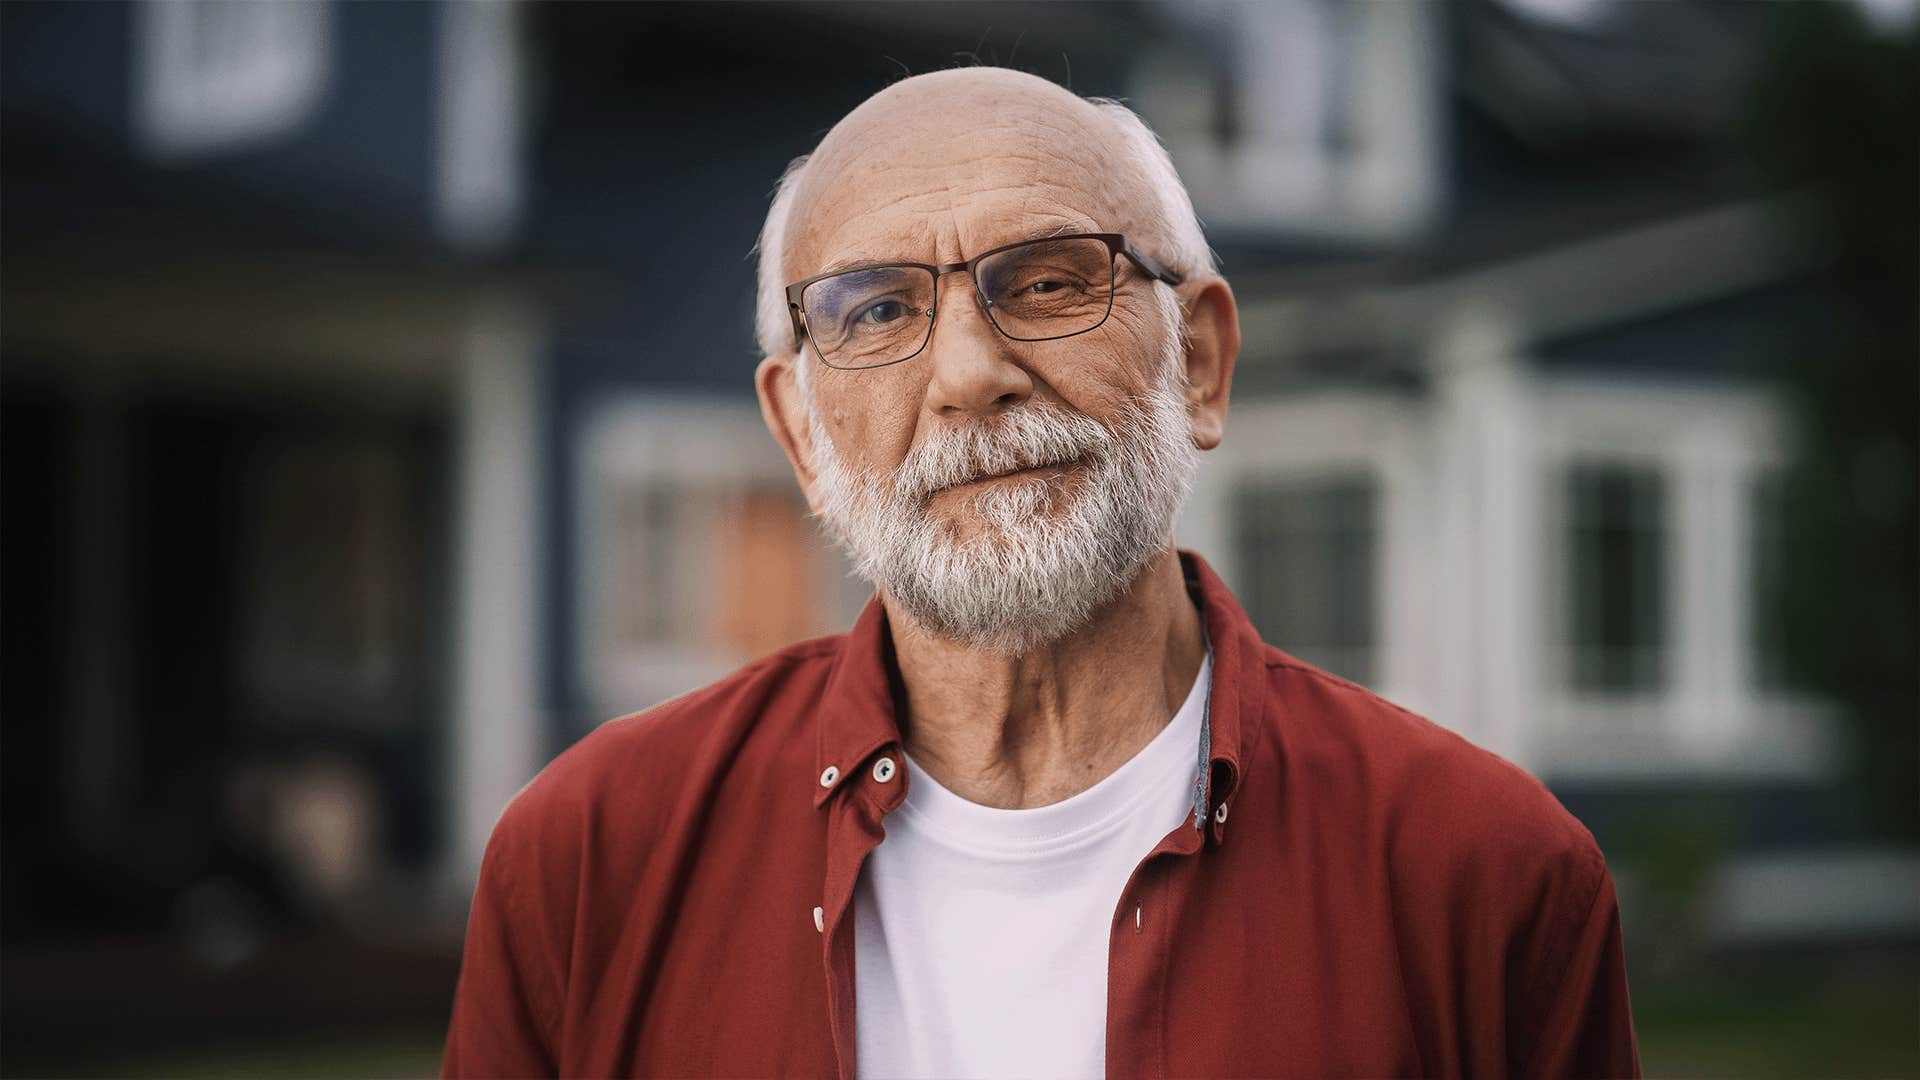 older man looking directly at the camera outside home